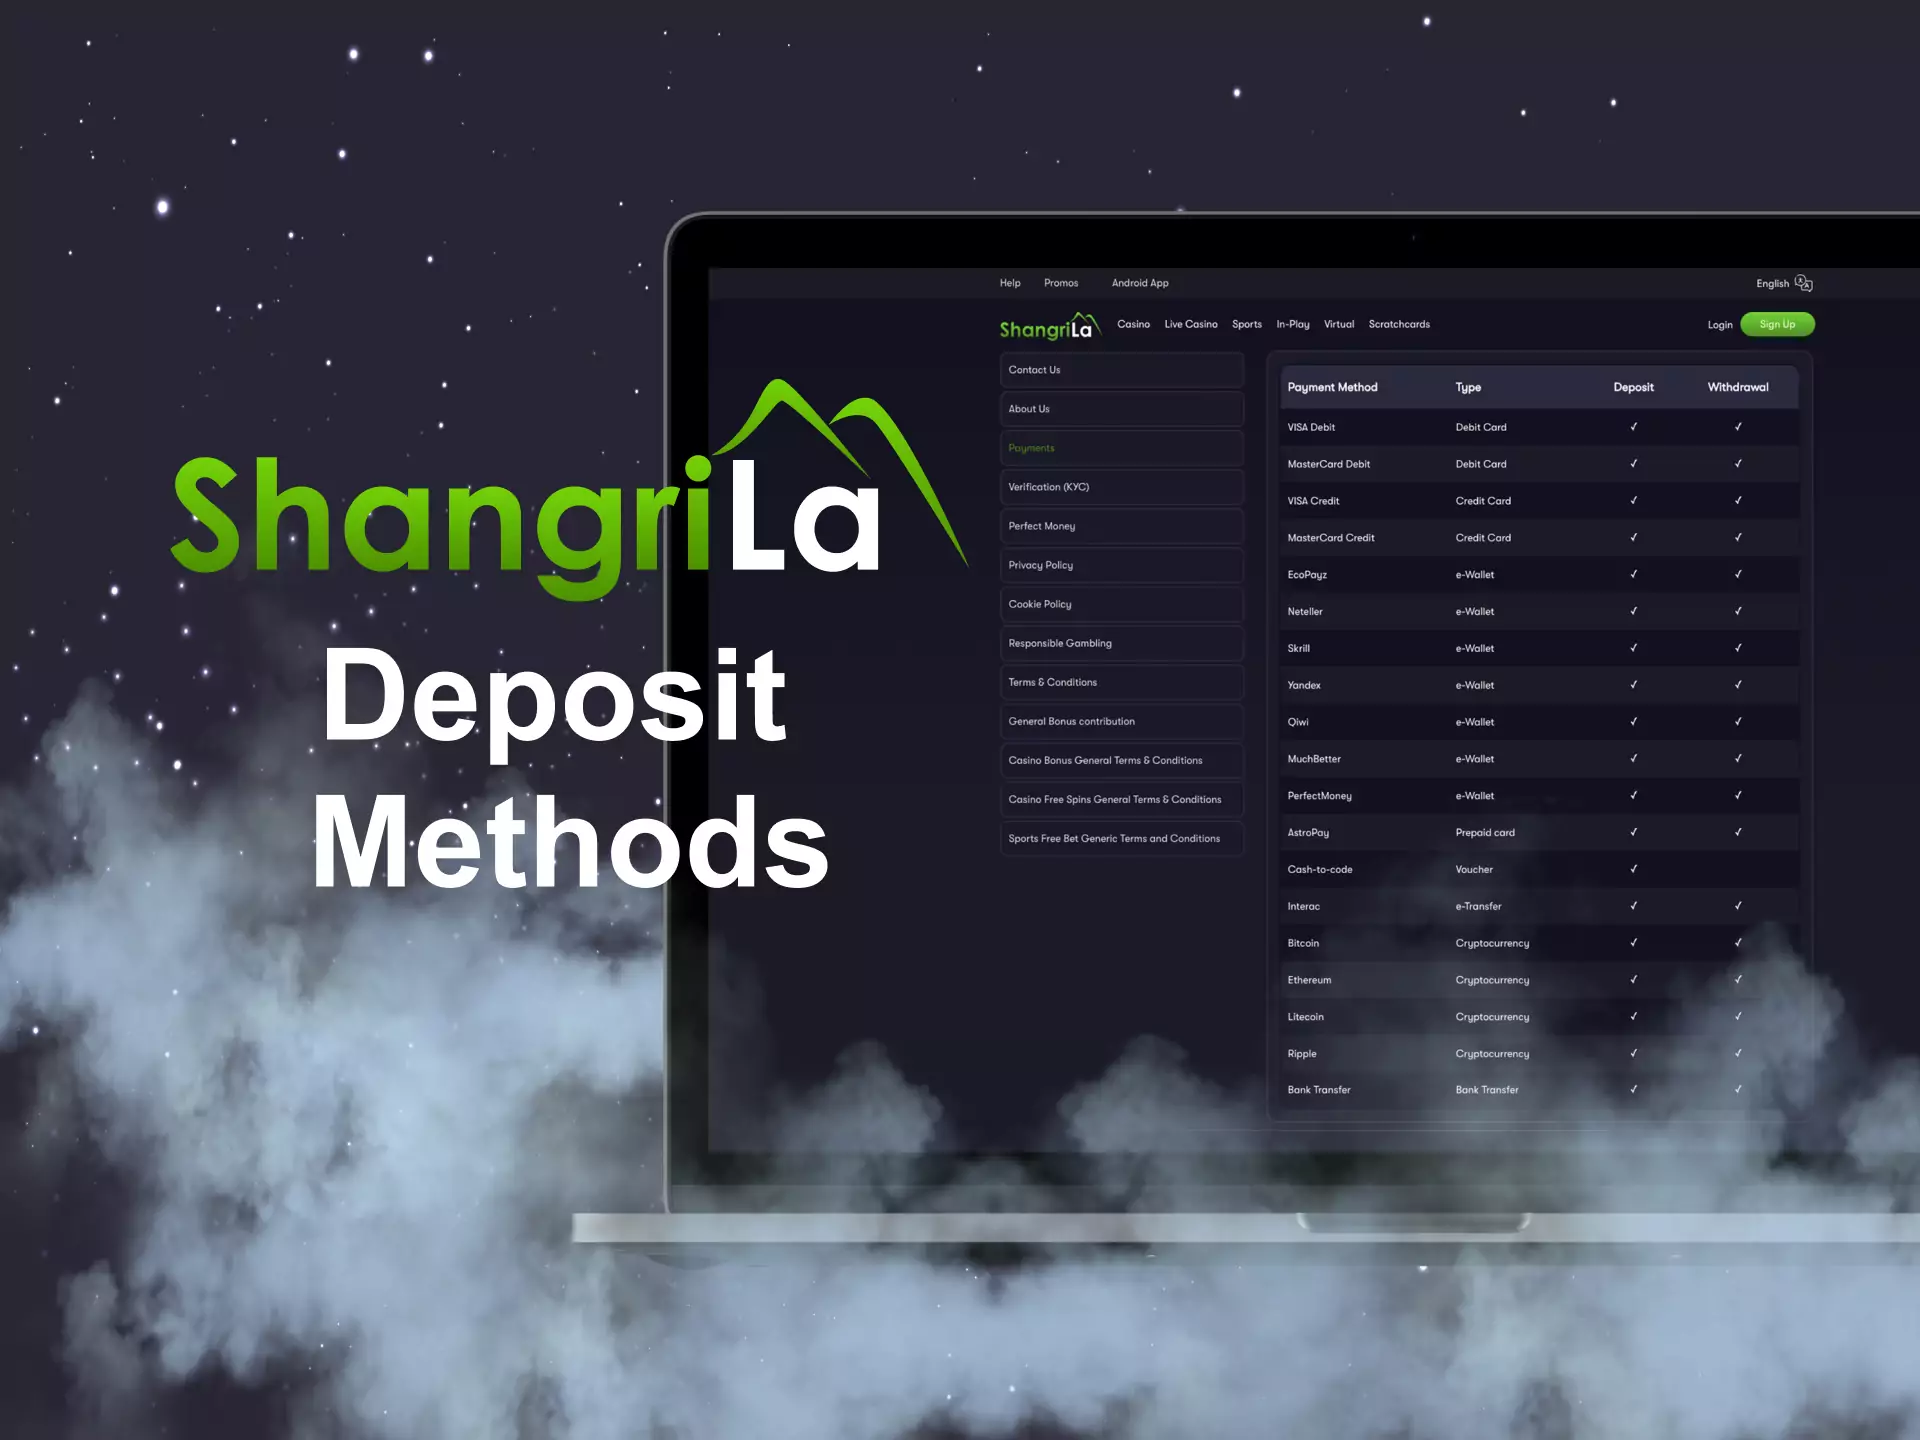 Make a deposit to get the welcome bonus and start betting on Shangri La.